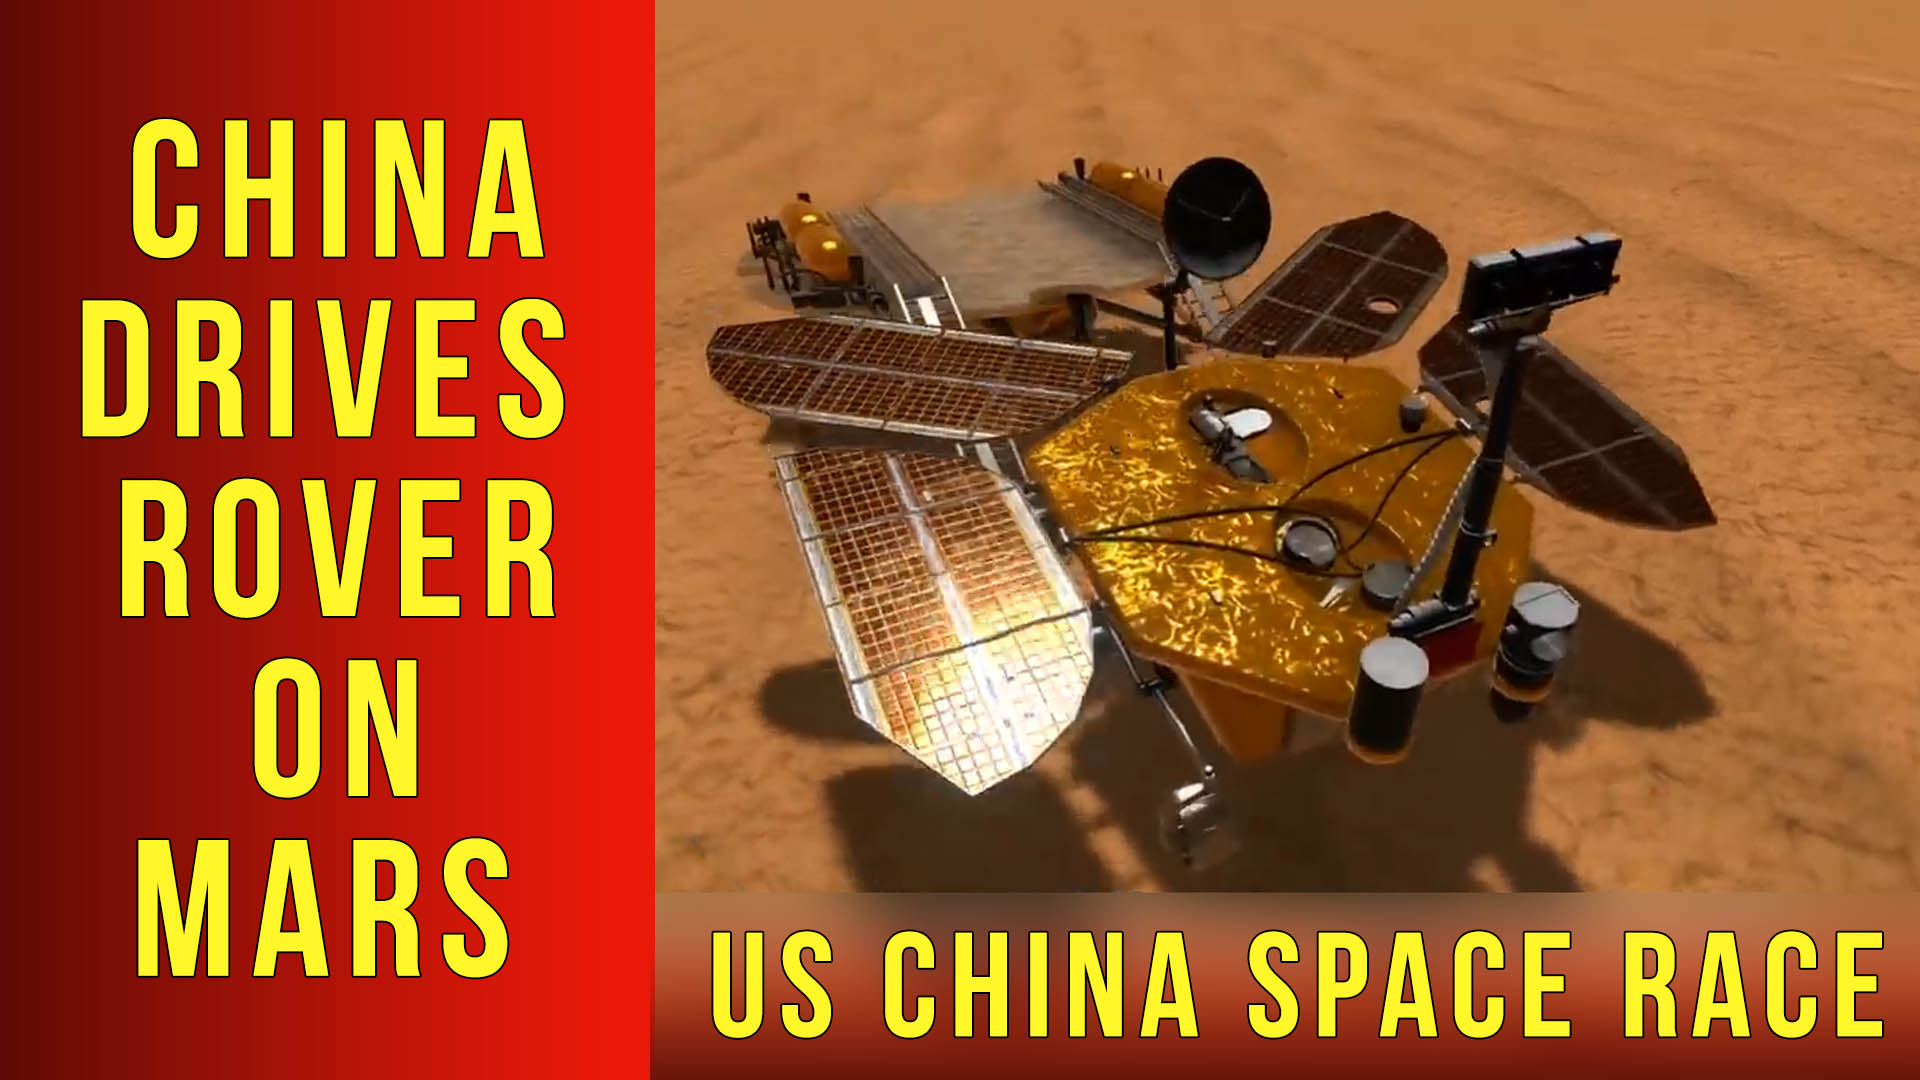 chinese rover zhurong drives on mars